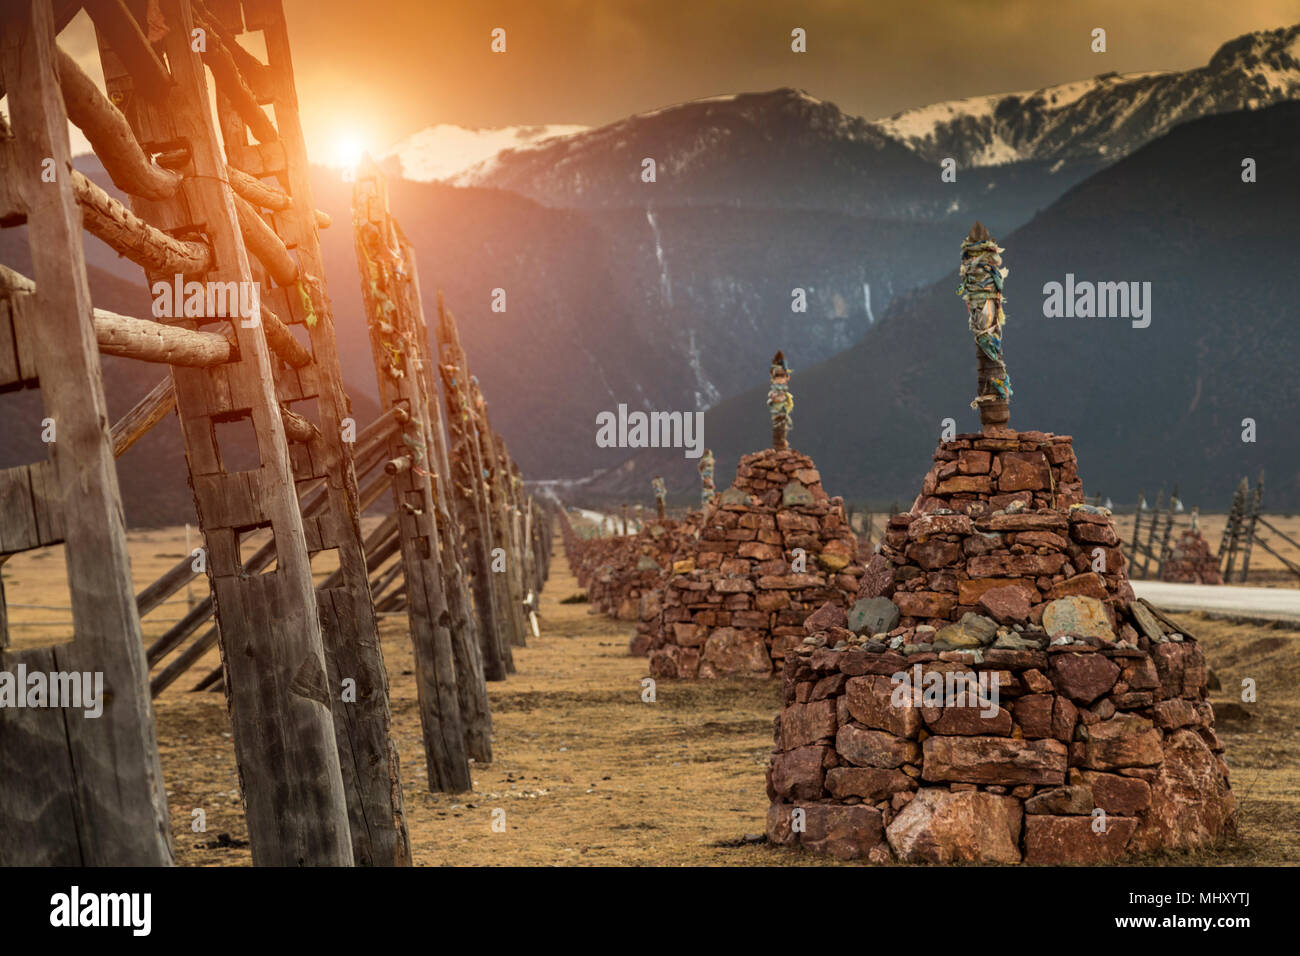 Religious structures, mountains in background, Shangri-La County, Yunnan, China Stock Photo